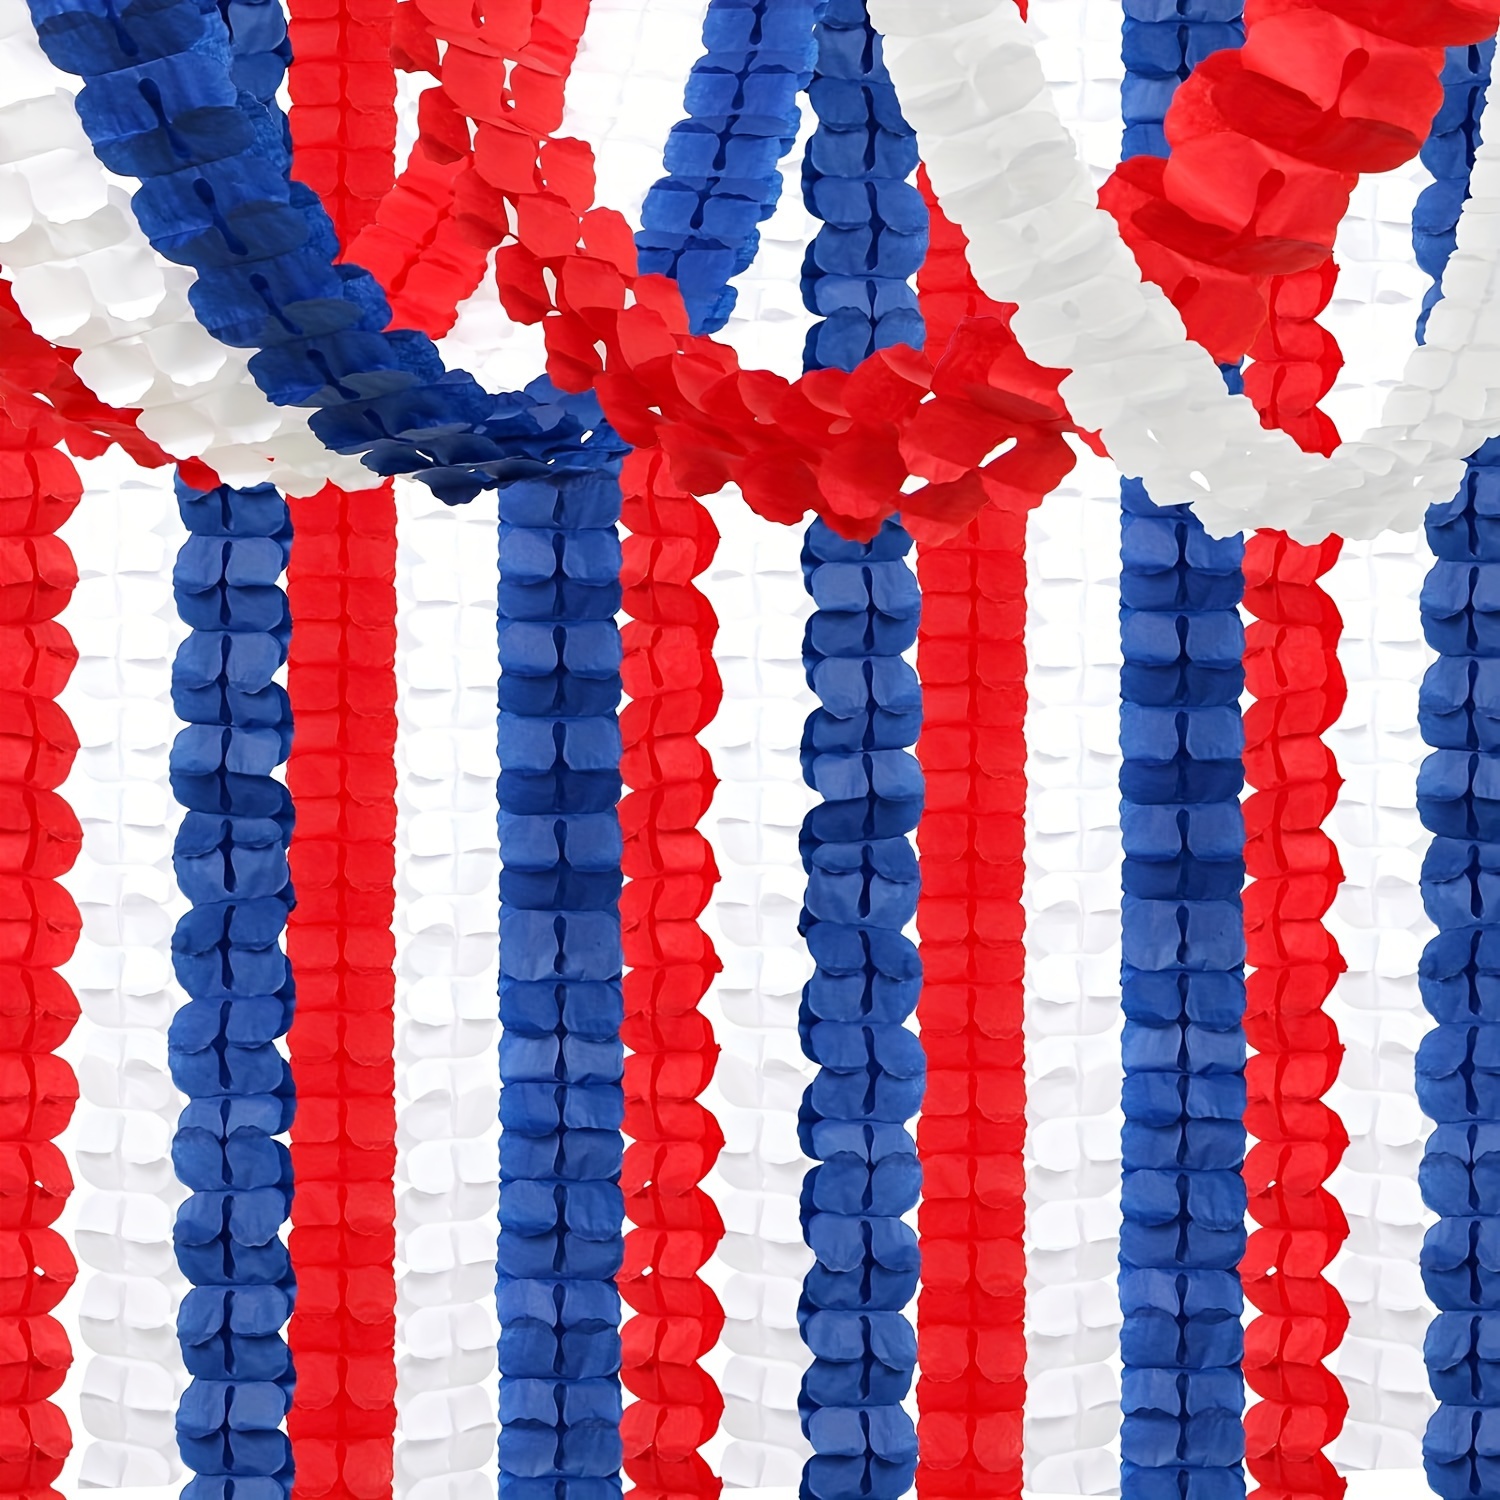 

4th Of July Patriotic Party Decor Set - 3-piece, 157ft Red White & Blue Streamer Garland With Clover Banner For Independence Day Celebration